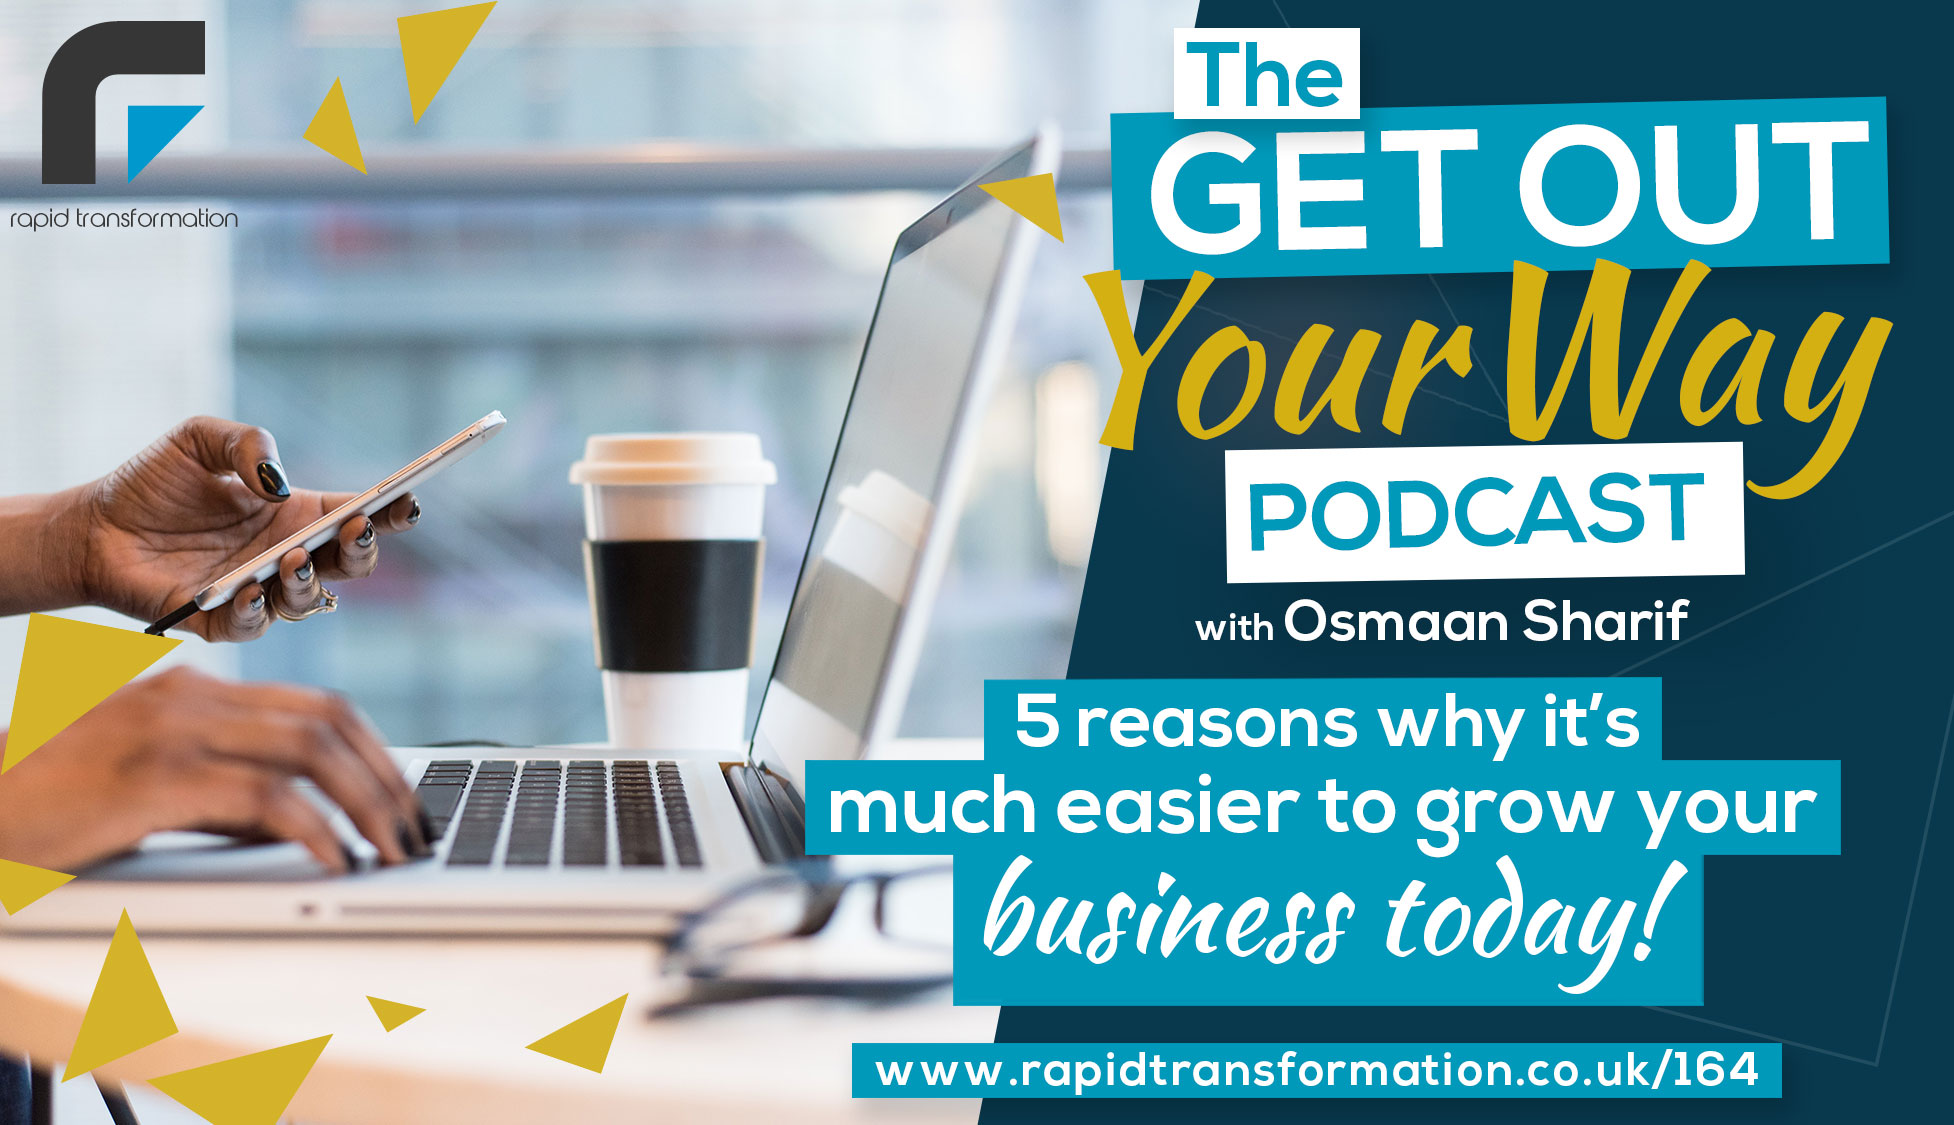 5 reasons why it’s much easier to grow your business today